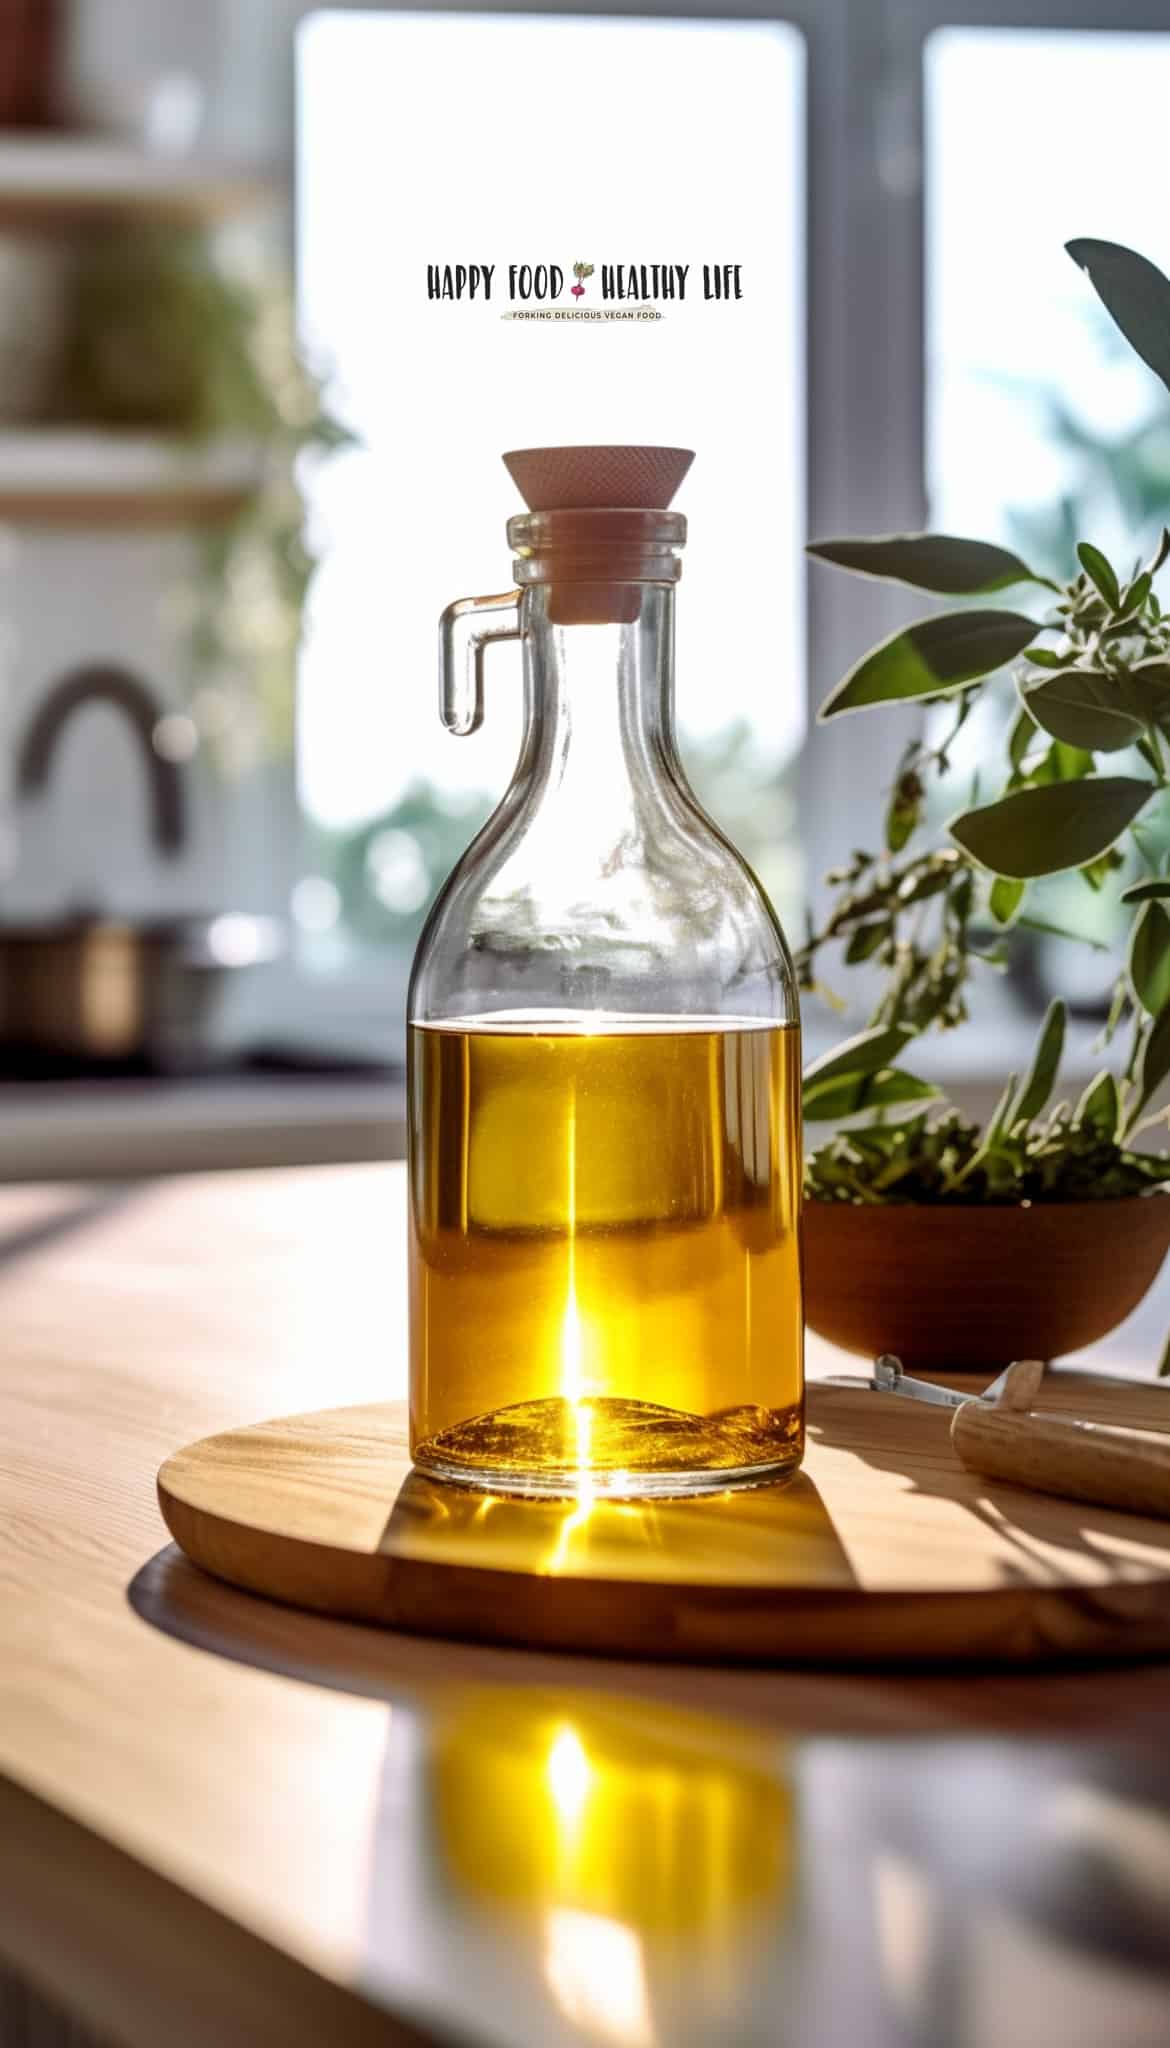 tall bottle of grapeseed oil sitting on a wooden coaster in a kitchen with a blurred back ground of greenery and a window